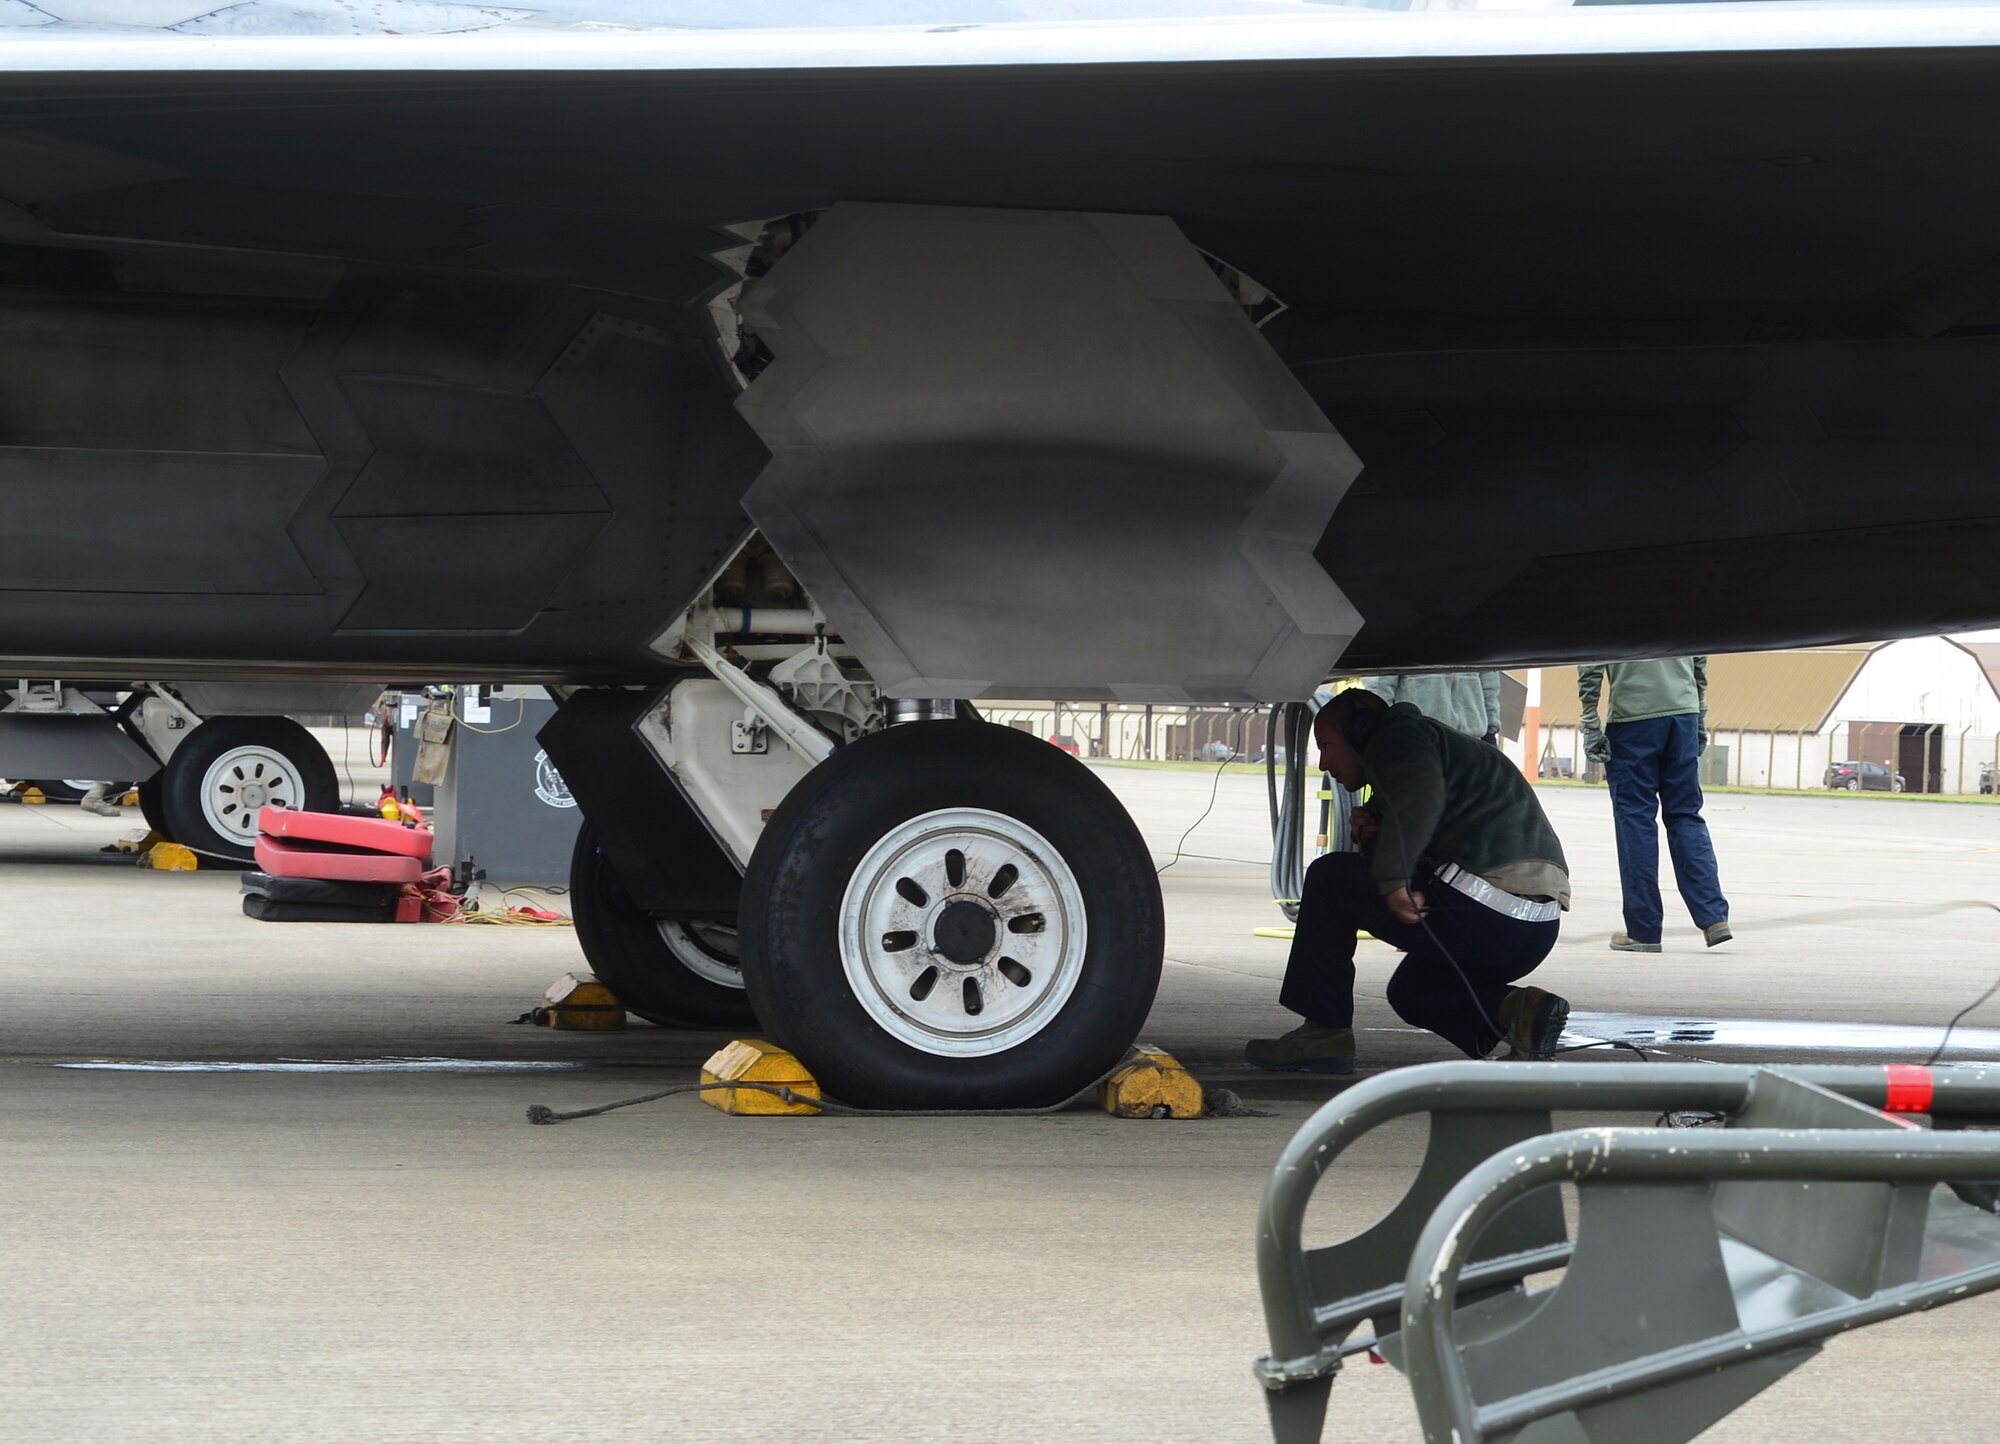 Maintenance Airmen assigned to the 325th Maintenance Squadron, Tyndall Air Force Base, Fla., perform pre-flight checks on an F-22 Raptor at Royal Air Force Lakenheath, England, April 18, 2016. The F-22s deployed from the 95th Fighter Squadron at Tyndall Air Force Base, Fla., and will be conducting air training exercises with other U.S. and Royal Air Force aircraft. (U.S. Air Force photo by Senior Airman Dawn M. Weber/Released)